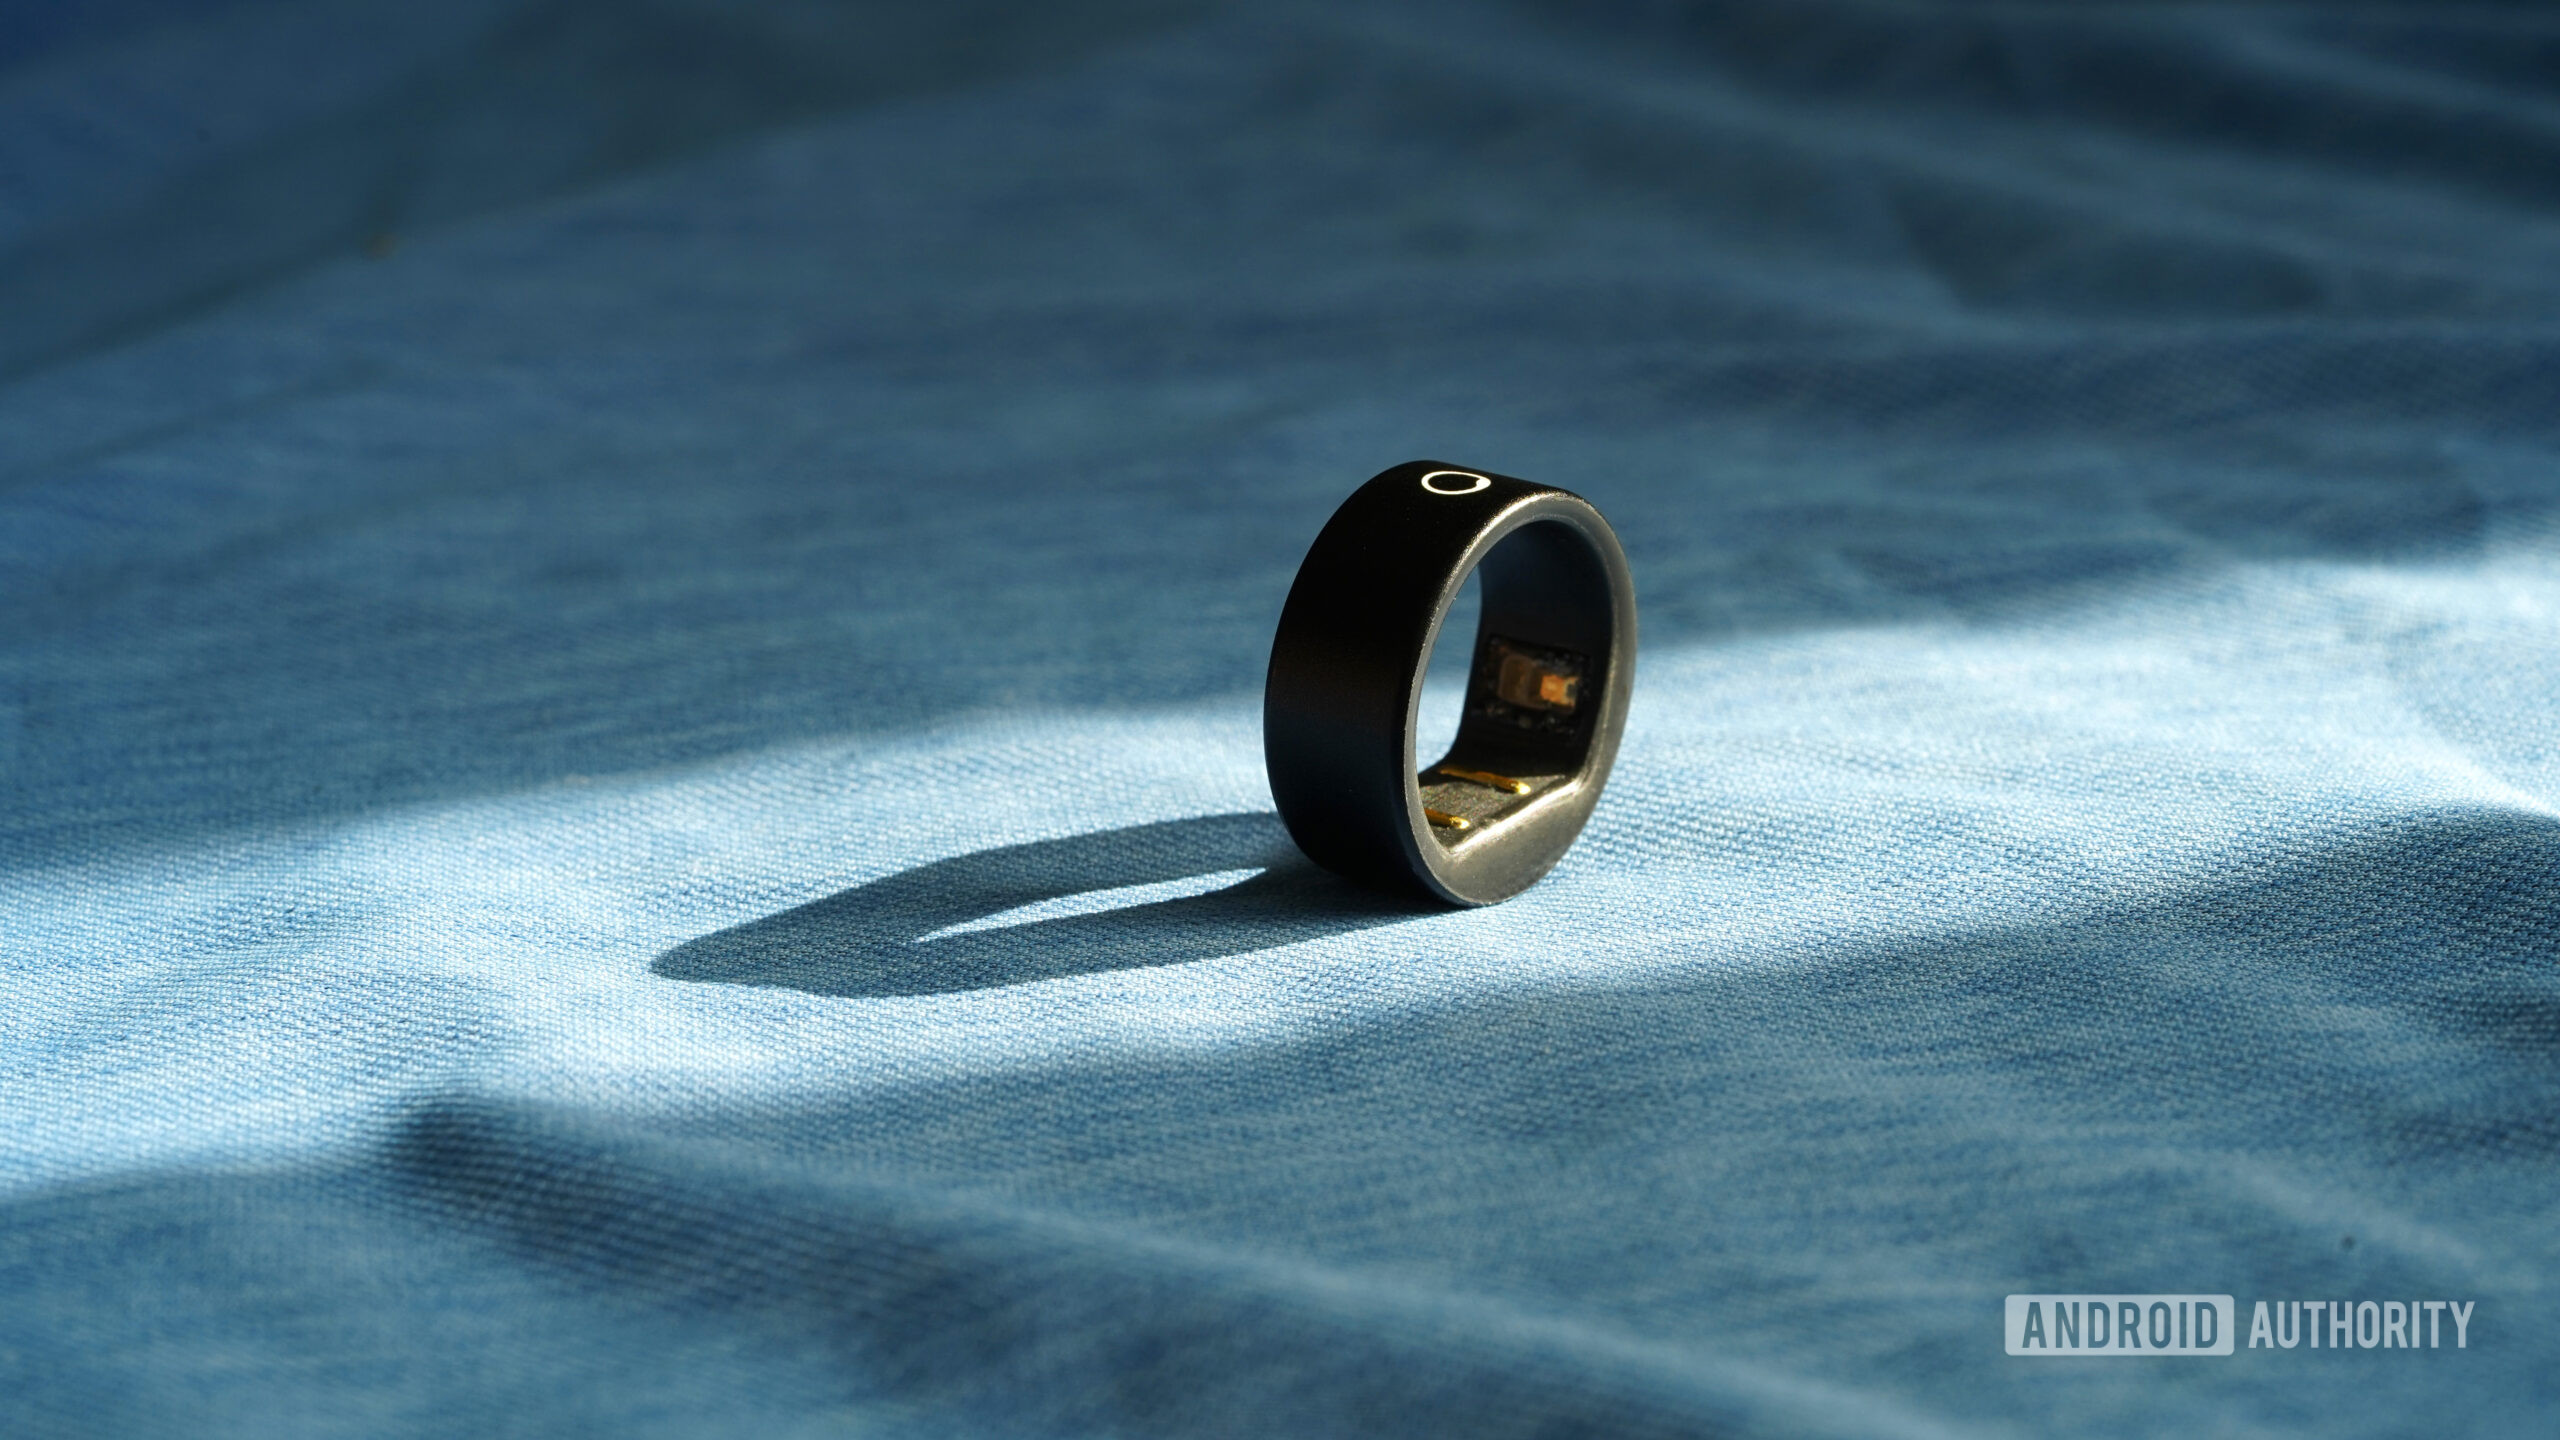 A Circular Ring Slim rests on a blue fabric surface.